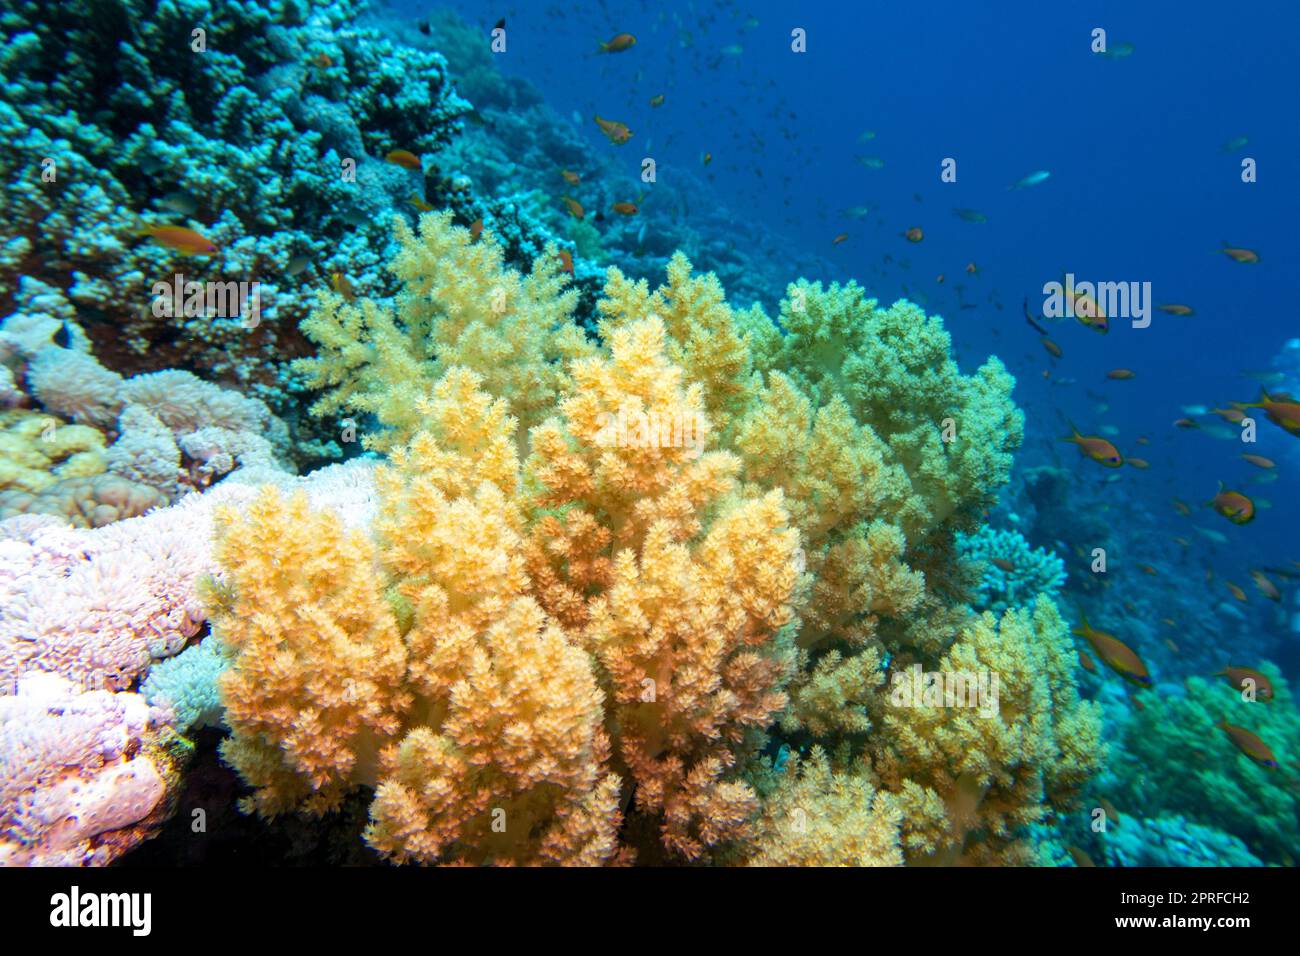 Colorful, picturesque coral reef at bottom of tropical sea, yellow broccoli coral and Anthias fishes, underwater landscape Stock Photo